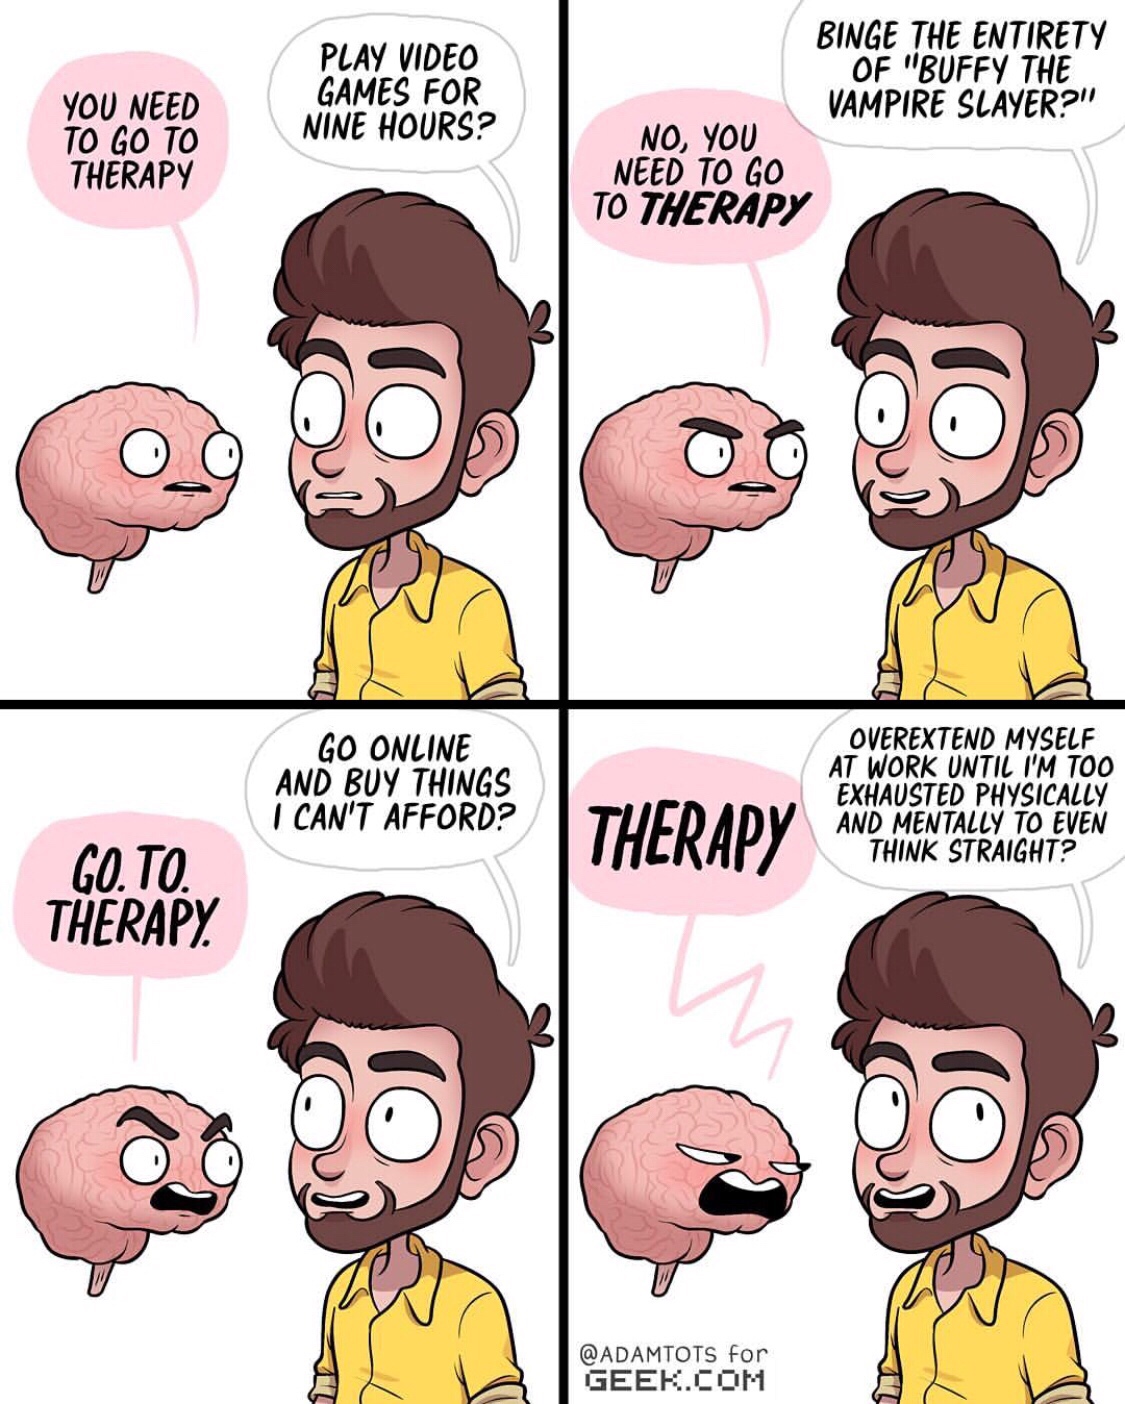 therapy meme - adamtots therapy - You Need To Go To Therapy Play Video Games For Nine Hours? Binge The Entirety Of